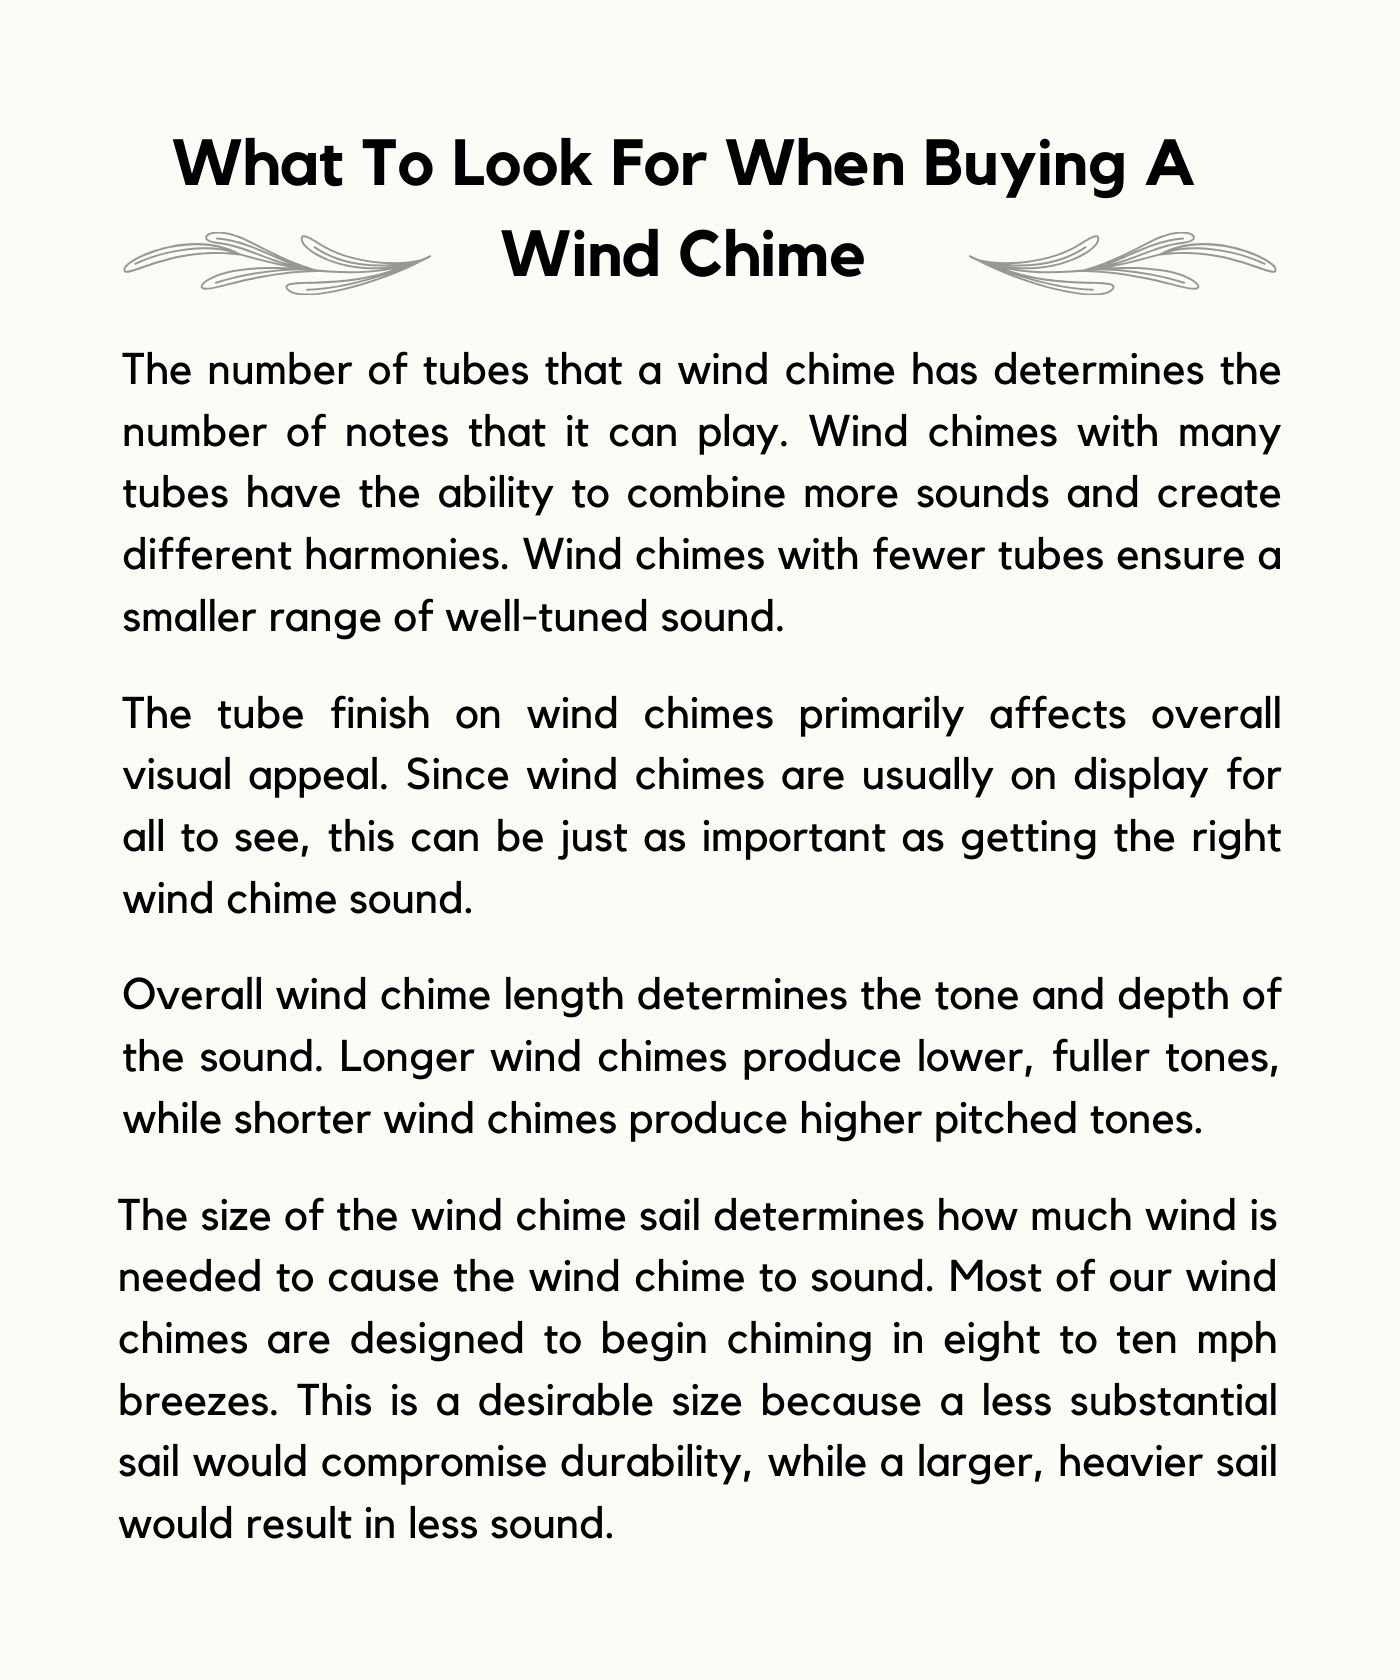 What To Look For When Buying A Wind Chime The number of tubes that a wind chime has determines the number of notes that it can play. Wind chimes with many tubes have the ability to combine more sounds and create different harmonies. Wind chimes with fewer tubes ensure a smaller range of well-tuned sound. The tube finish on wind chimes primarily affects overall visual appeal. Since wind chimes are usually on display for all to see, this can be just as important as getting the right wind chime sound. Overall wind chime length determines the tone and depth of the sound. Longer wind chimes produce lower, fuller tones, while shorter wind chimes produce higher pitched tones. The size of the wind chime sail determines how much wind is needed to cause the wind chime to sound. Most of our wind chimes are designed to begin chiming in eight to ten mph breezes. This is a desirable size because a less substantial sail would compromise durability, while a larger, heavier sail would result in less sound.